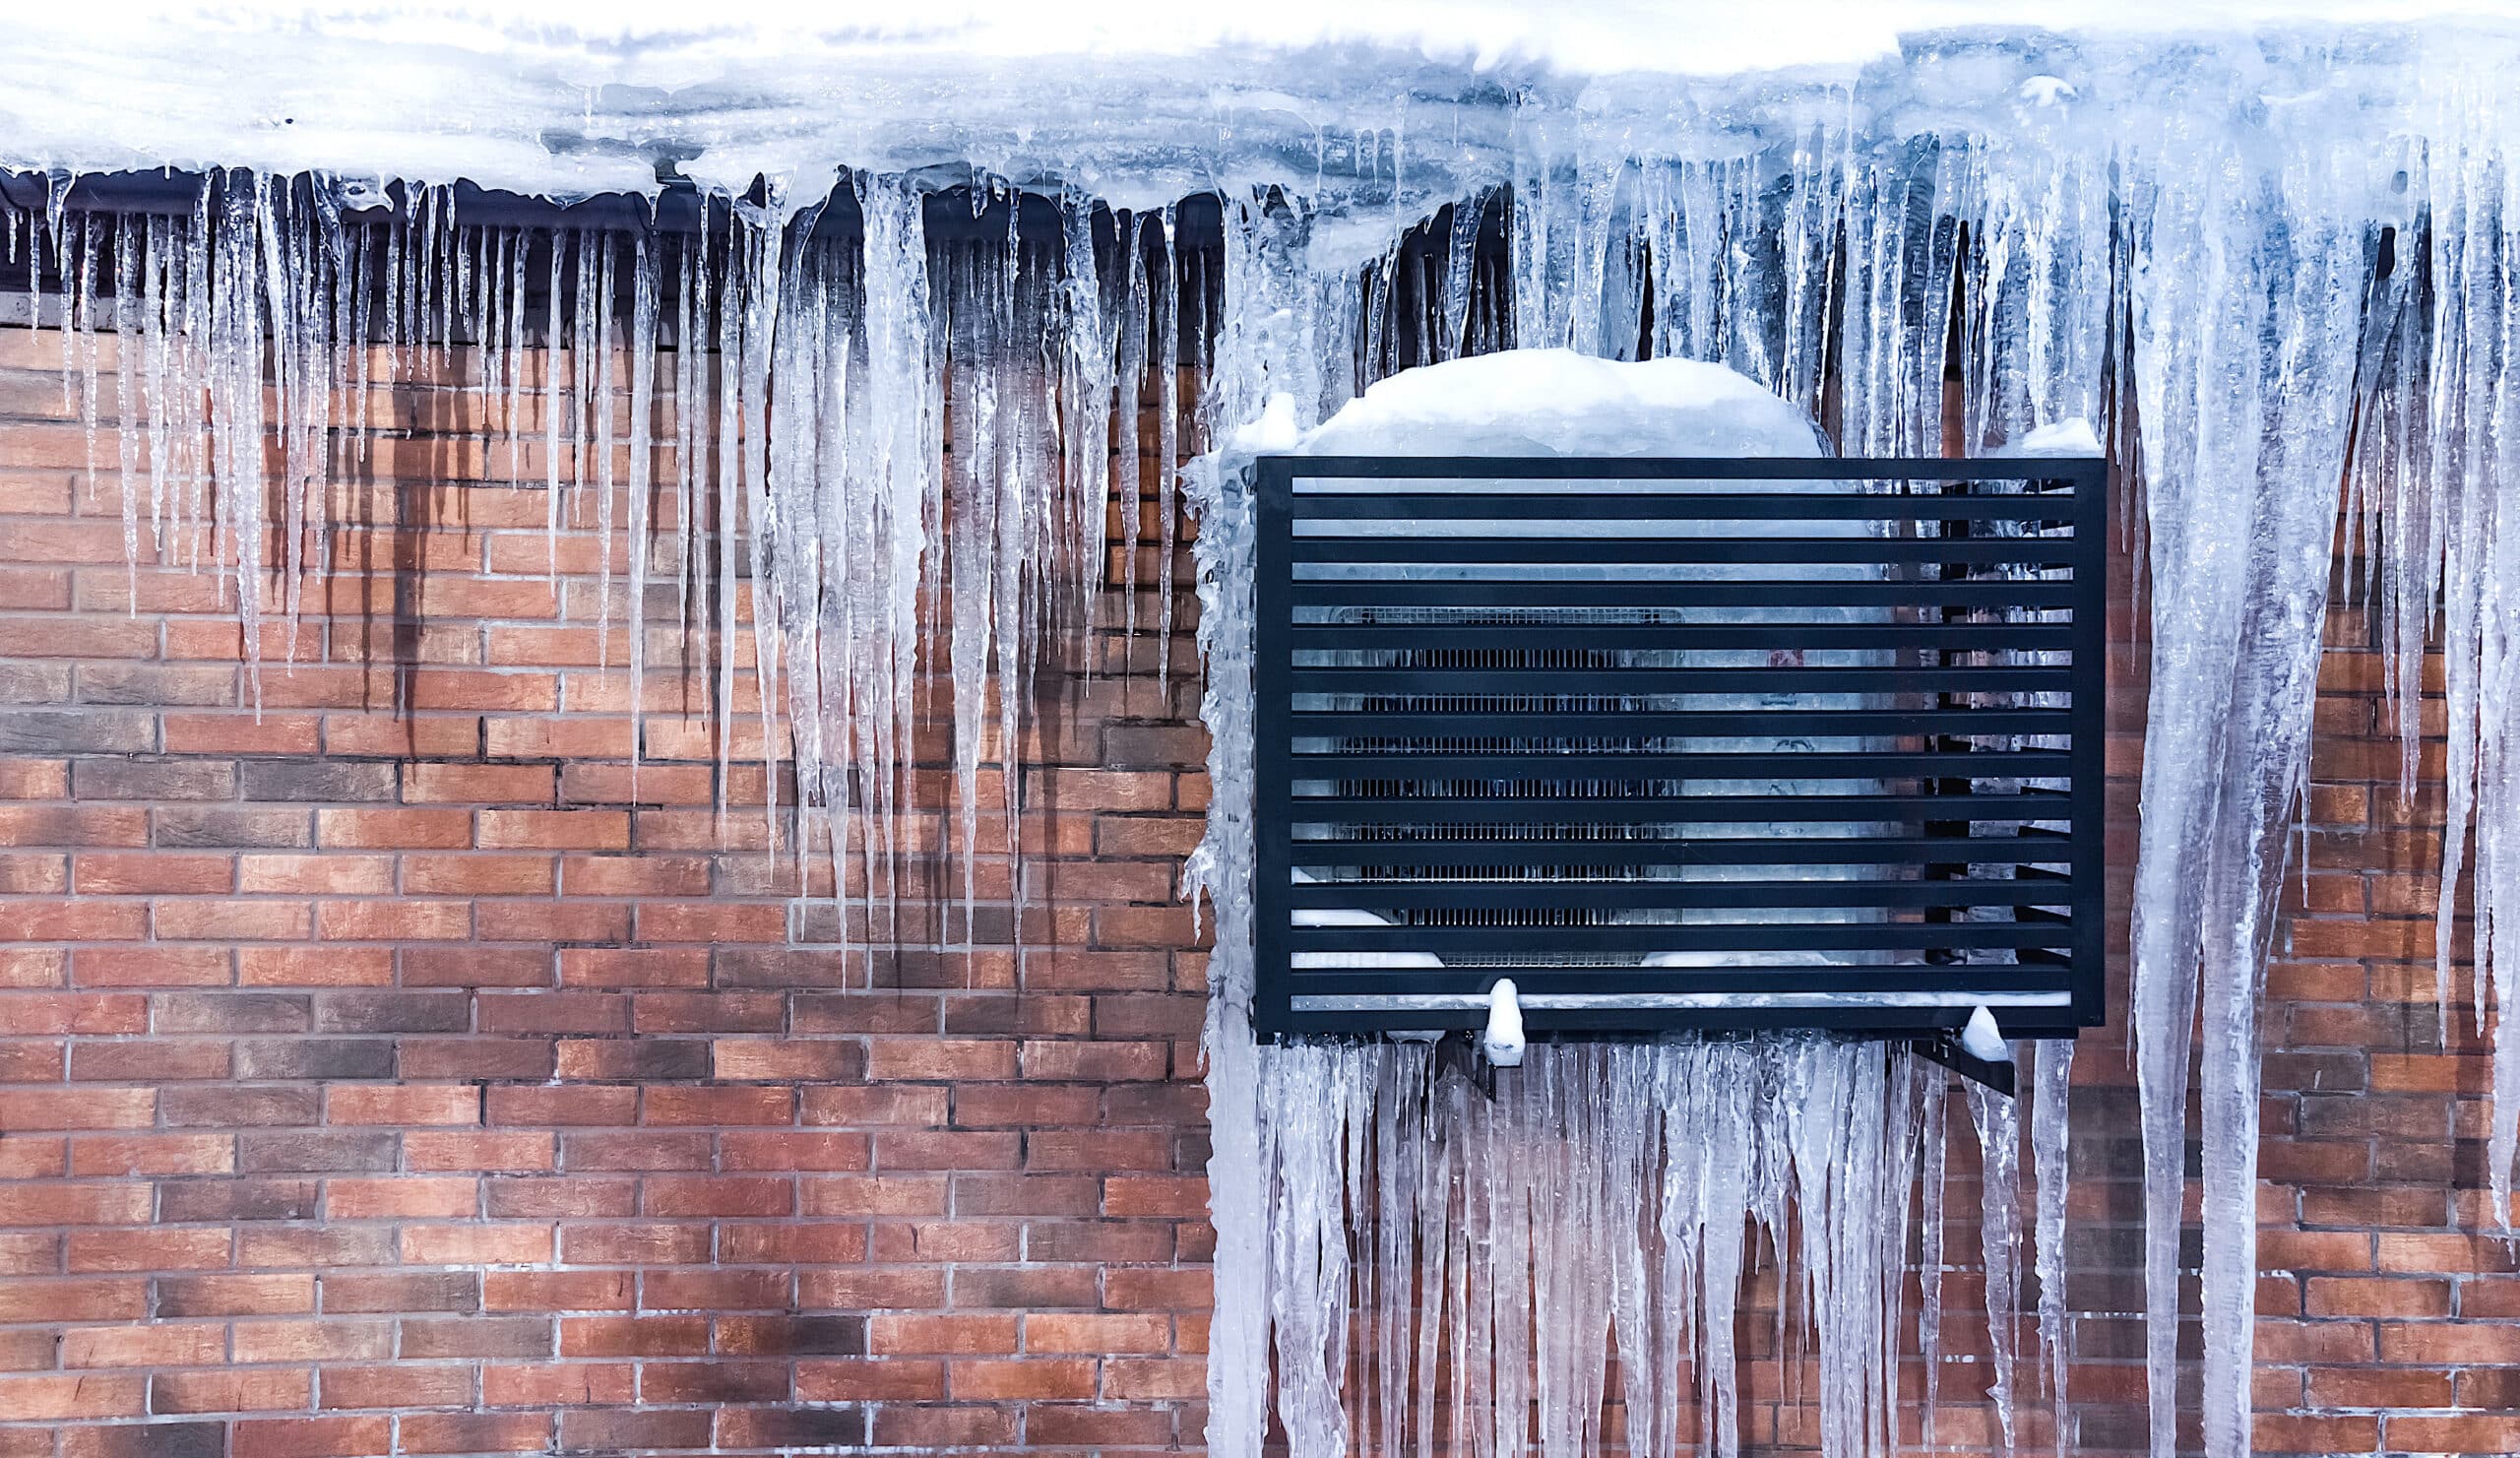 heat pump being exposed to the elements during a cold winter blast